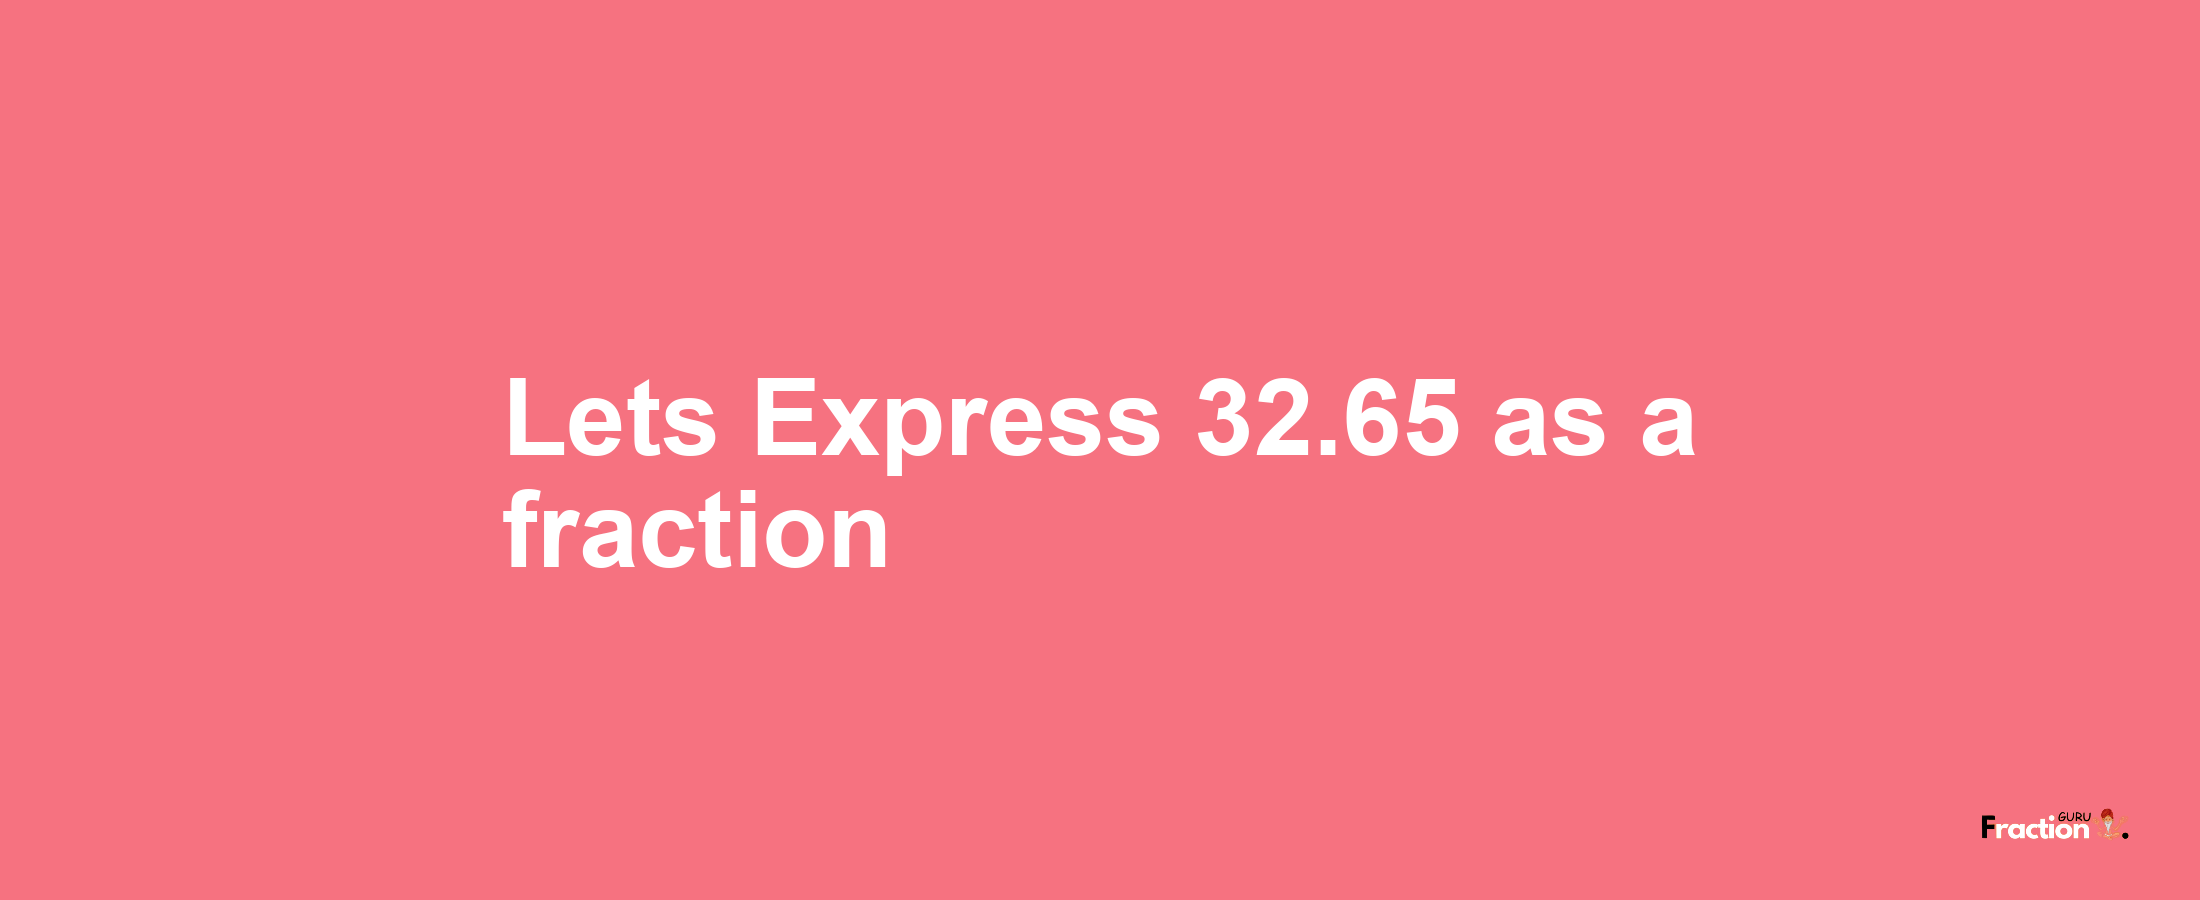 Lets Express 32.65 as afraction